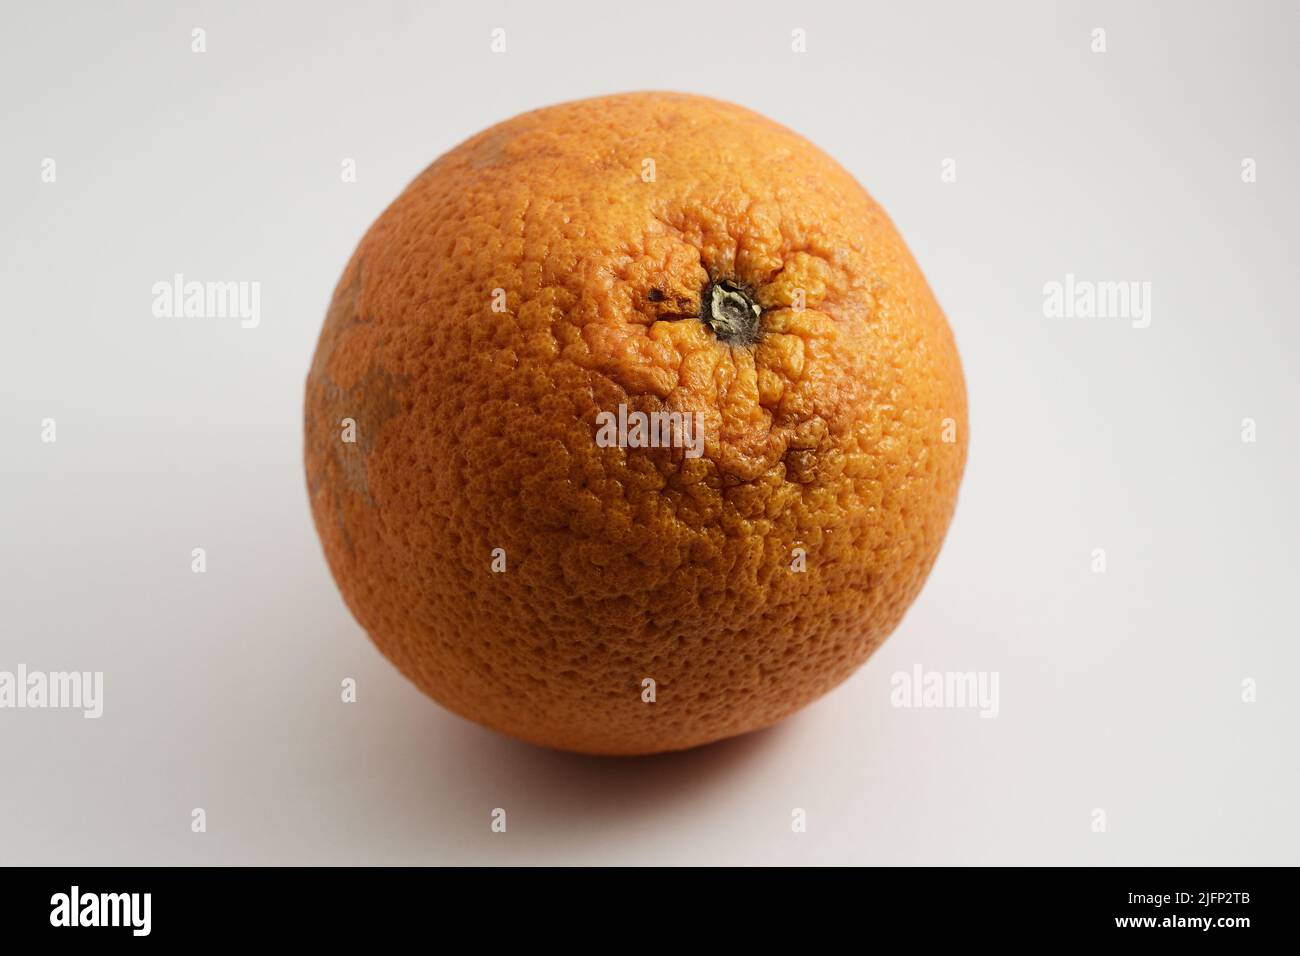 one orange with a pronounced peel texture on a white background Stock Photo